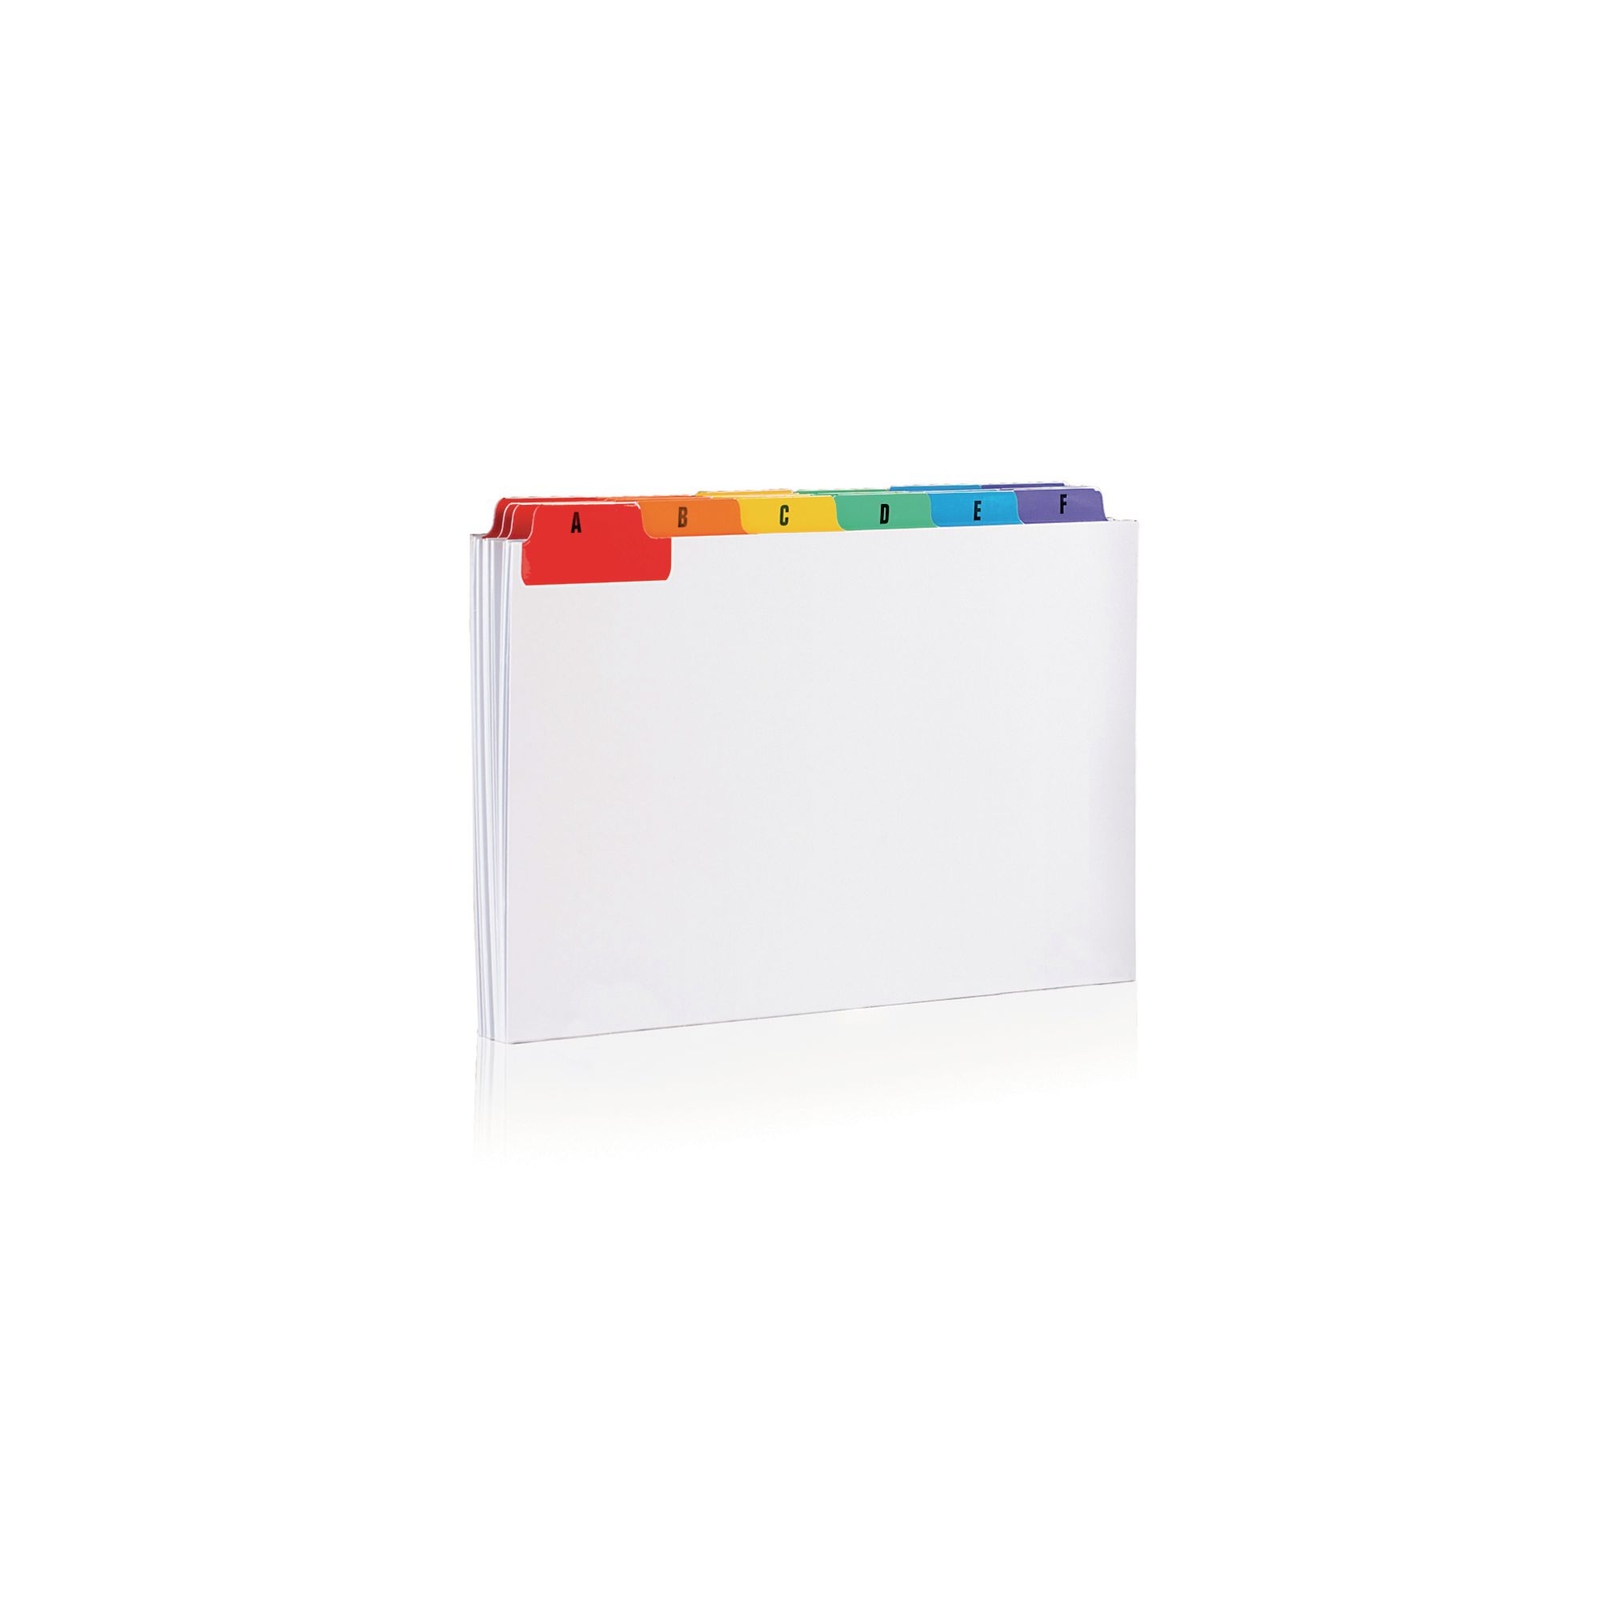 A-Z Guide Cards 203 x 127mm White